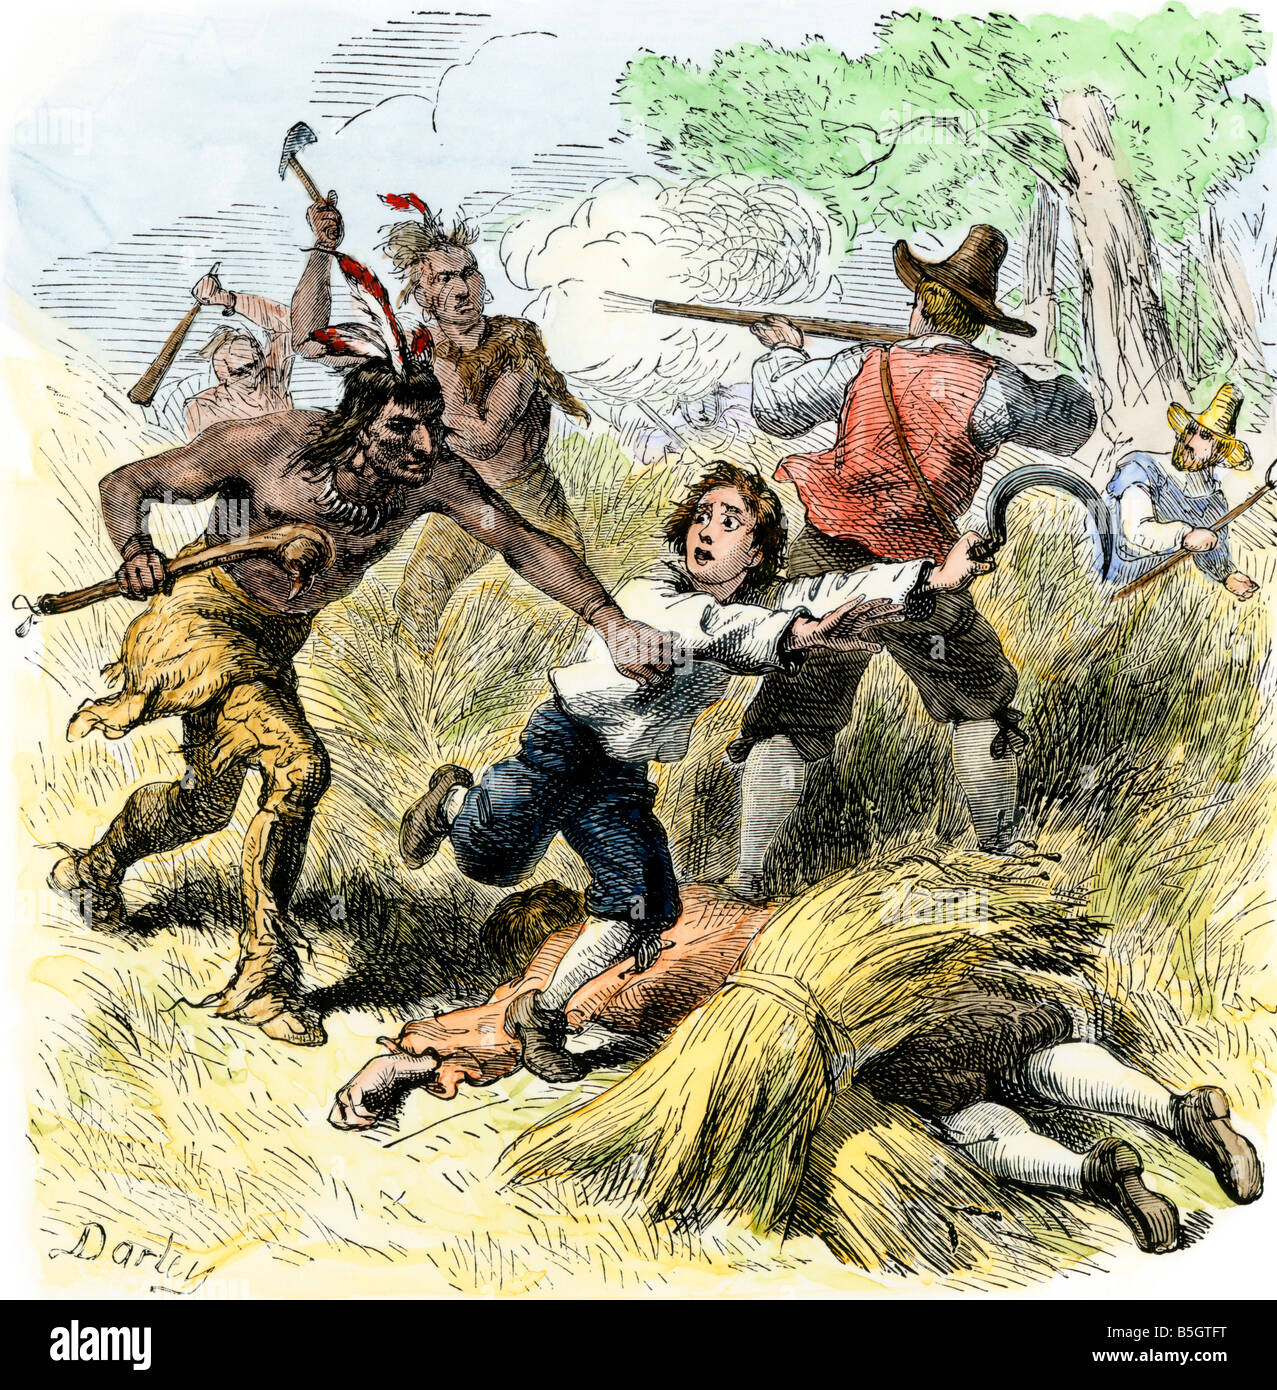 Native American raid on settlers in New England during King Philip's War 1675. Hand-colored woodcut Stock Photo